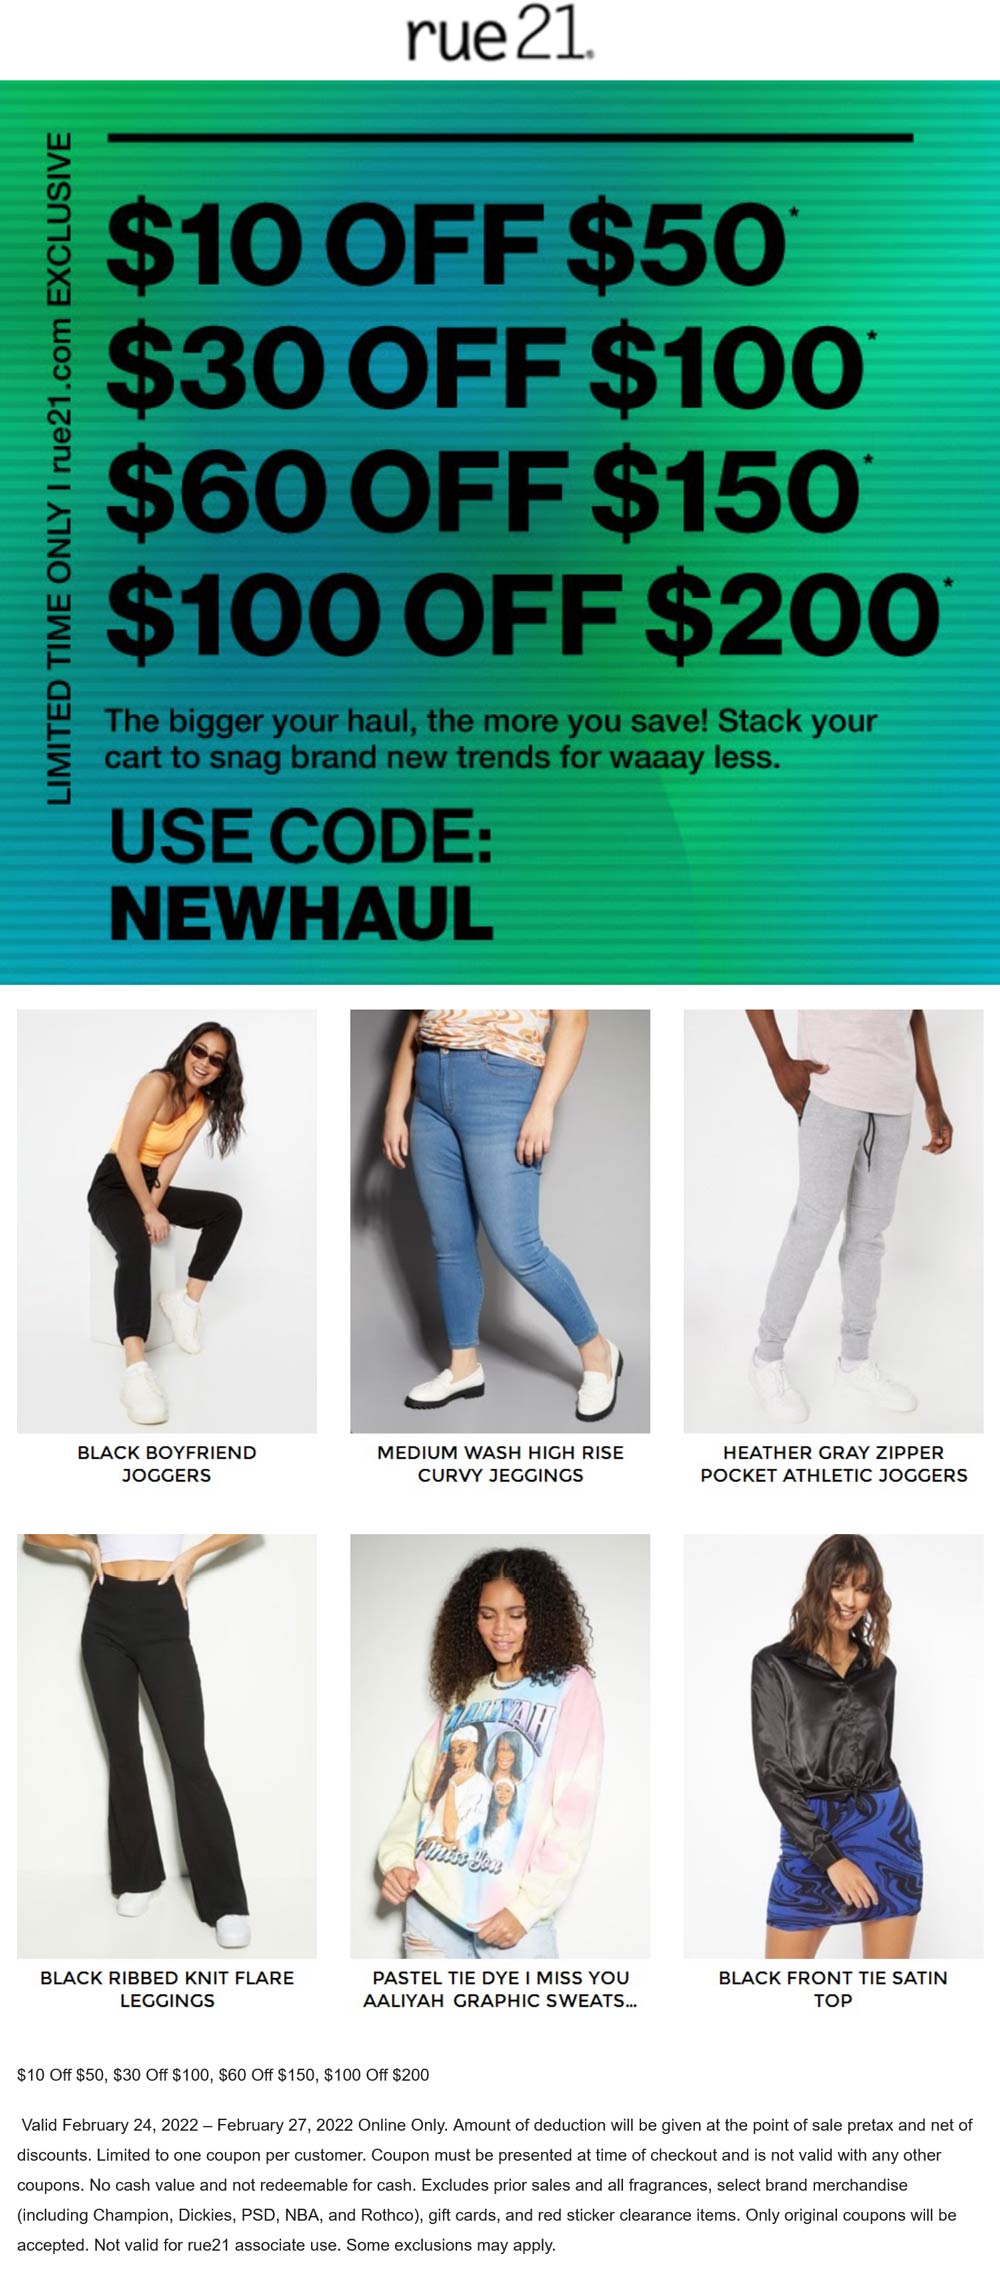 rue21 stores Coupon  $10-$100 off $50+ online at rue21 via promo code NEWHAUL #rue21 